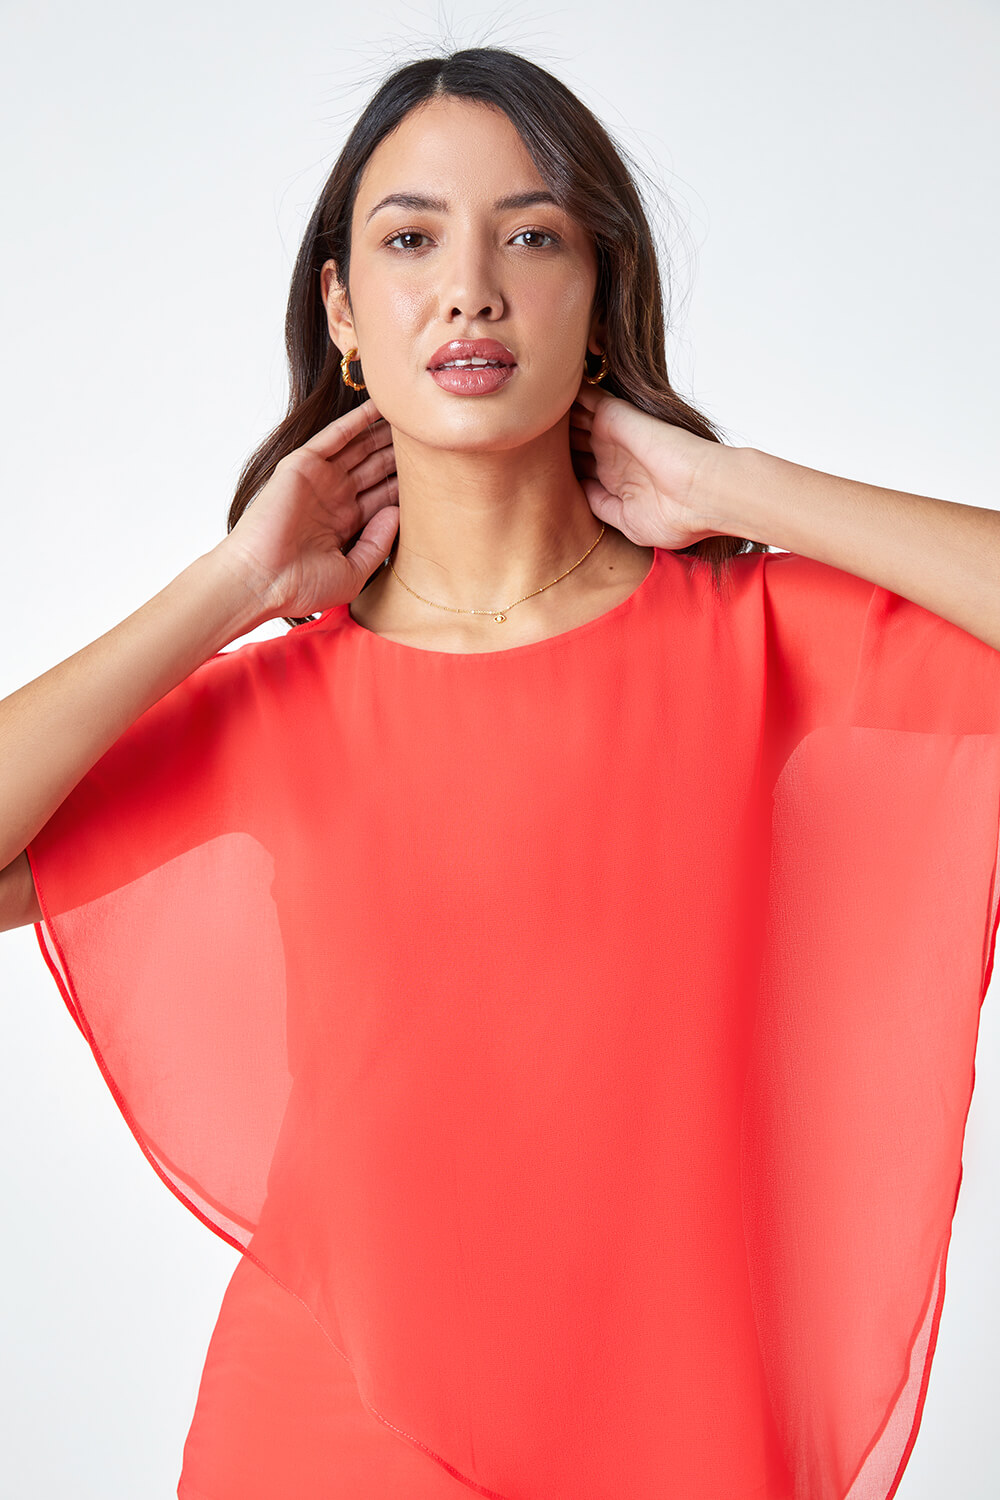 CORAL Asymmetric Cold Shoulder Stretch Top, Image 4 of 5